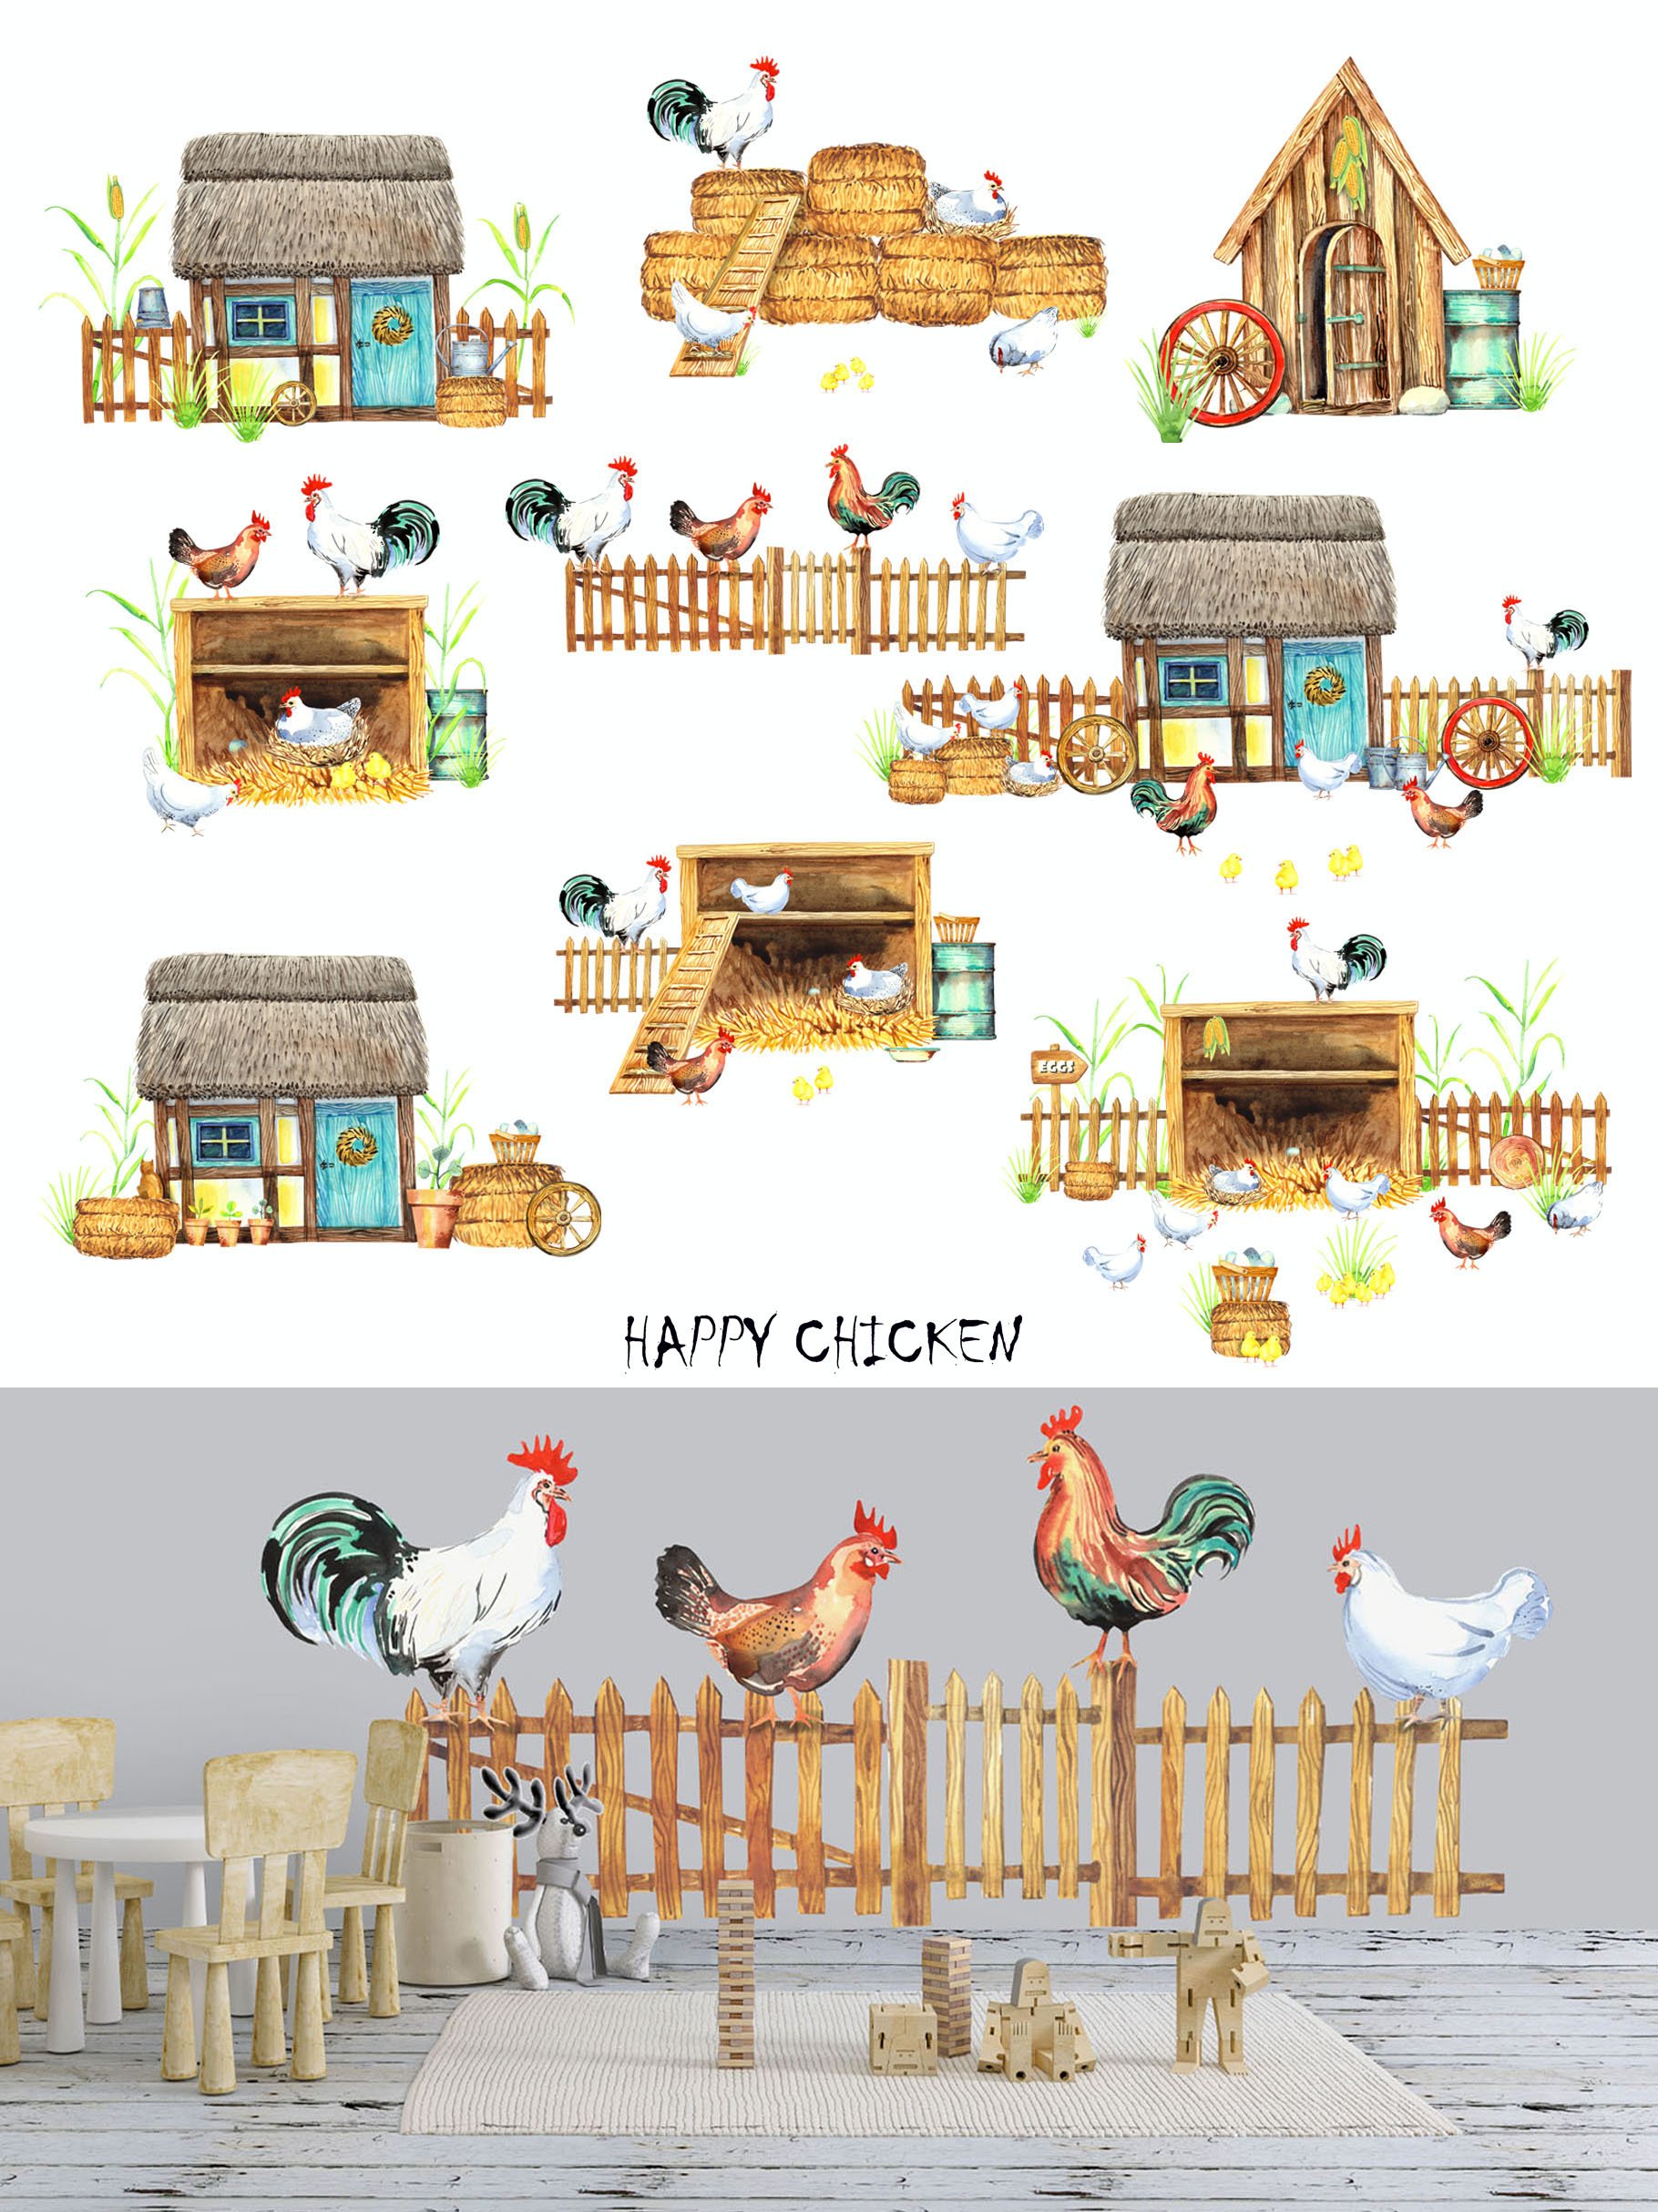 Special items for chicken home.